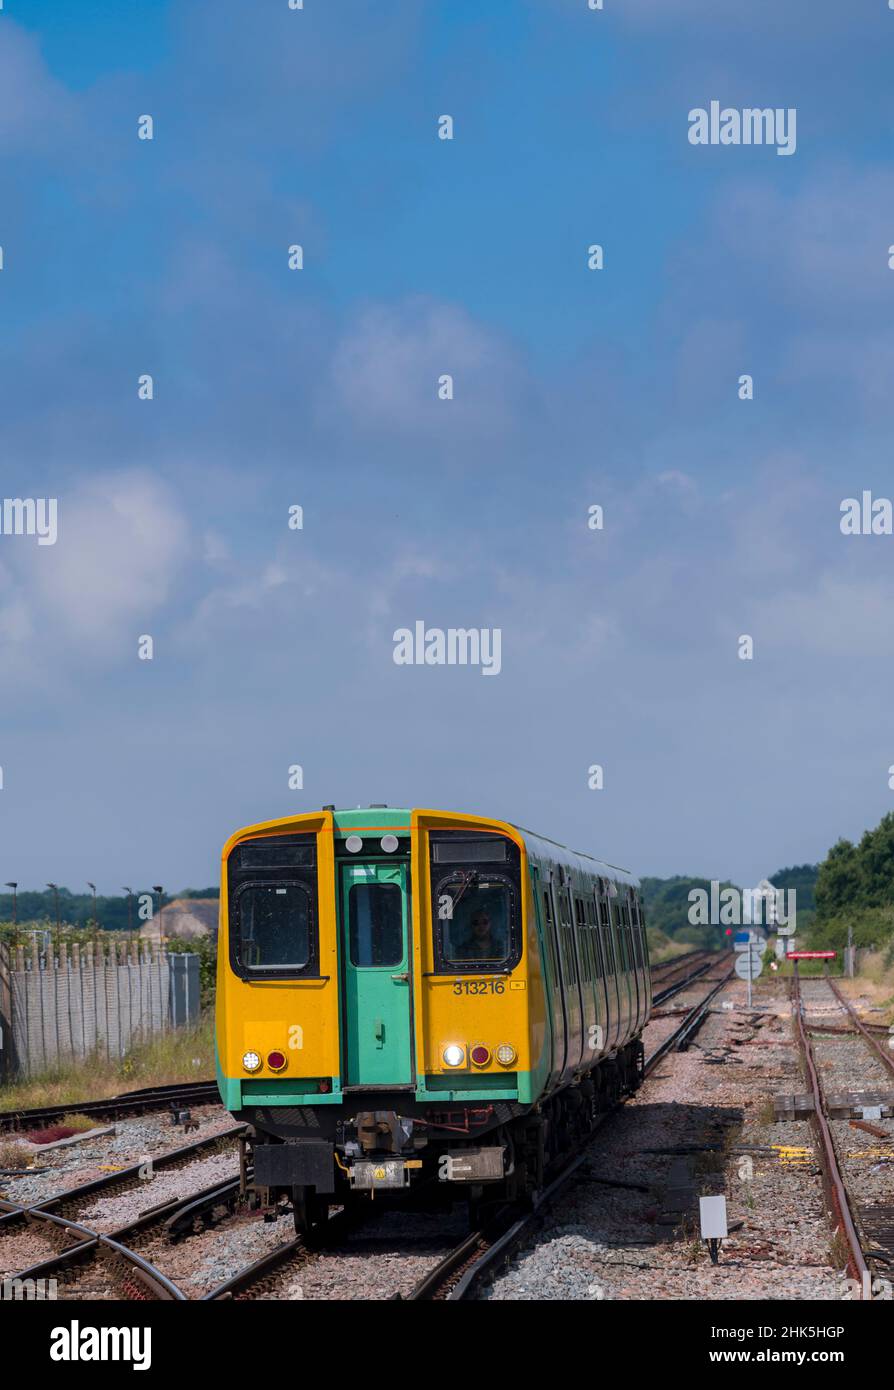 Southern Railway class 313 passenger train travelling along track in the UK. , Stock Photo